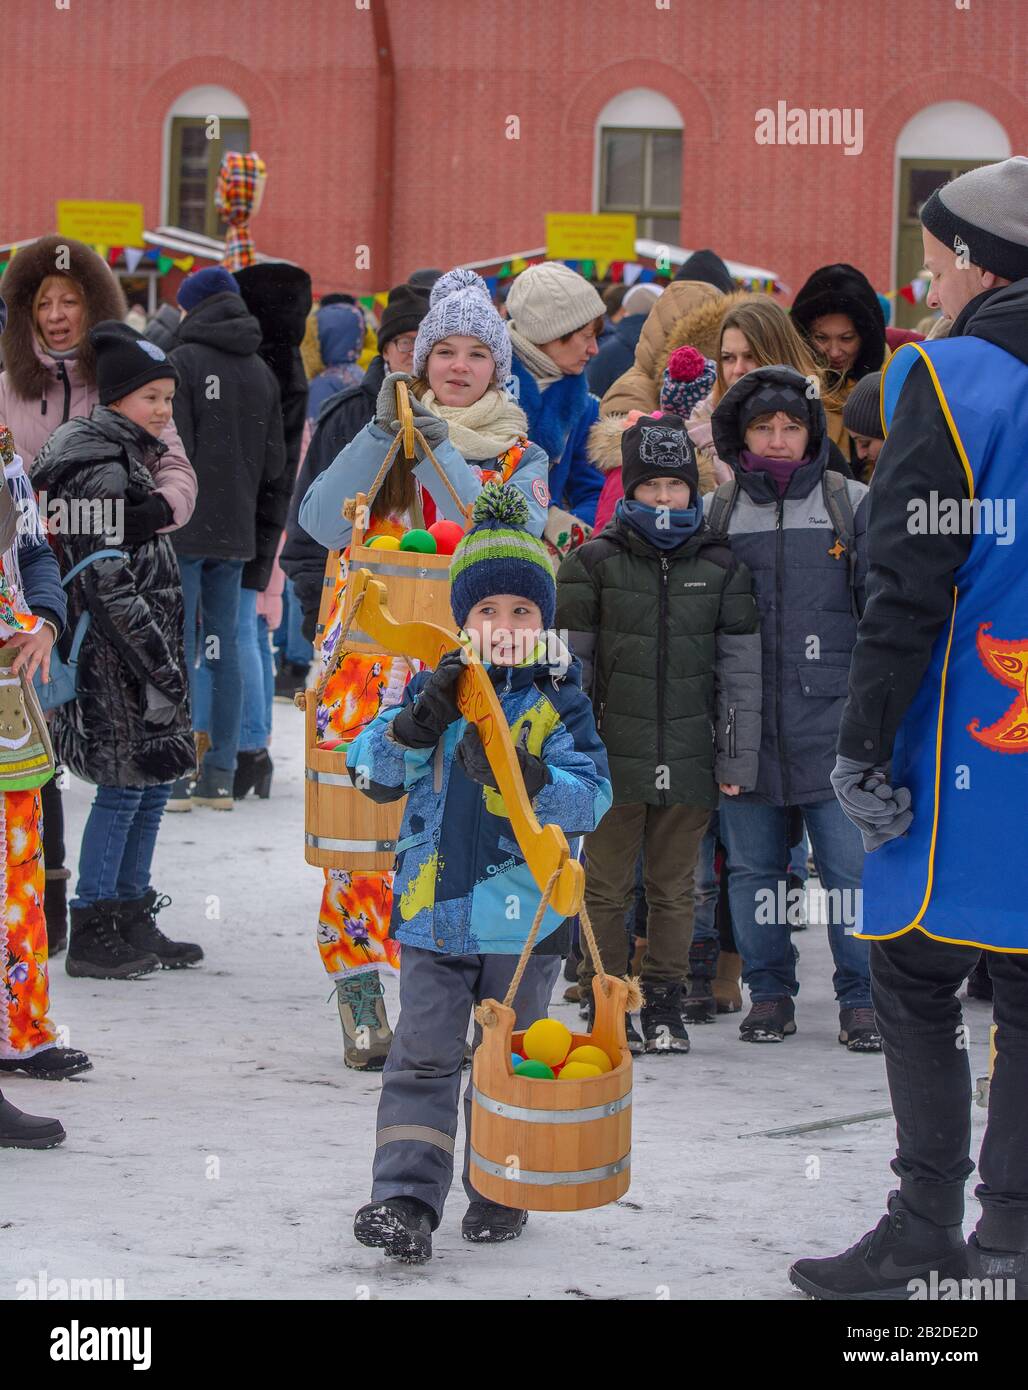 Rabbit Island. St. Petersburg. Russia. 03/01/2020. Celebration of Maslenitsa on the territory of the Peter and Paul Fortress in St. Petersburg. Stock Photo